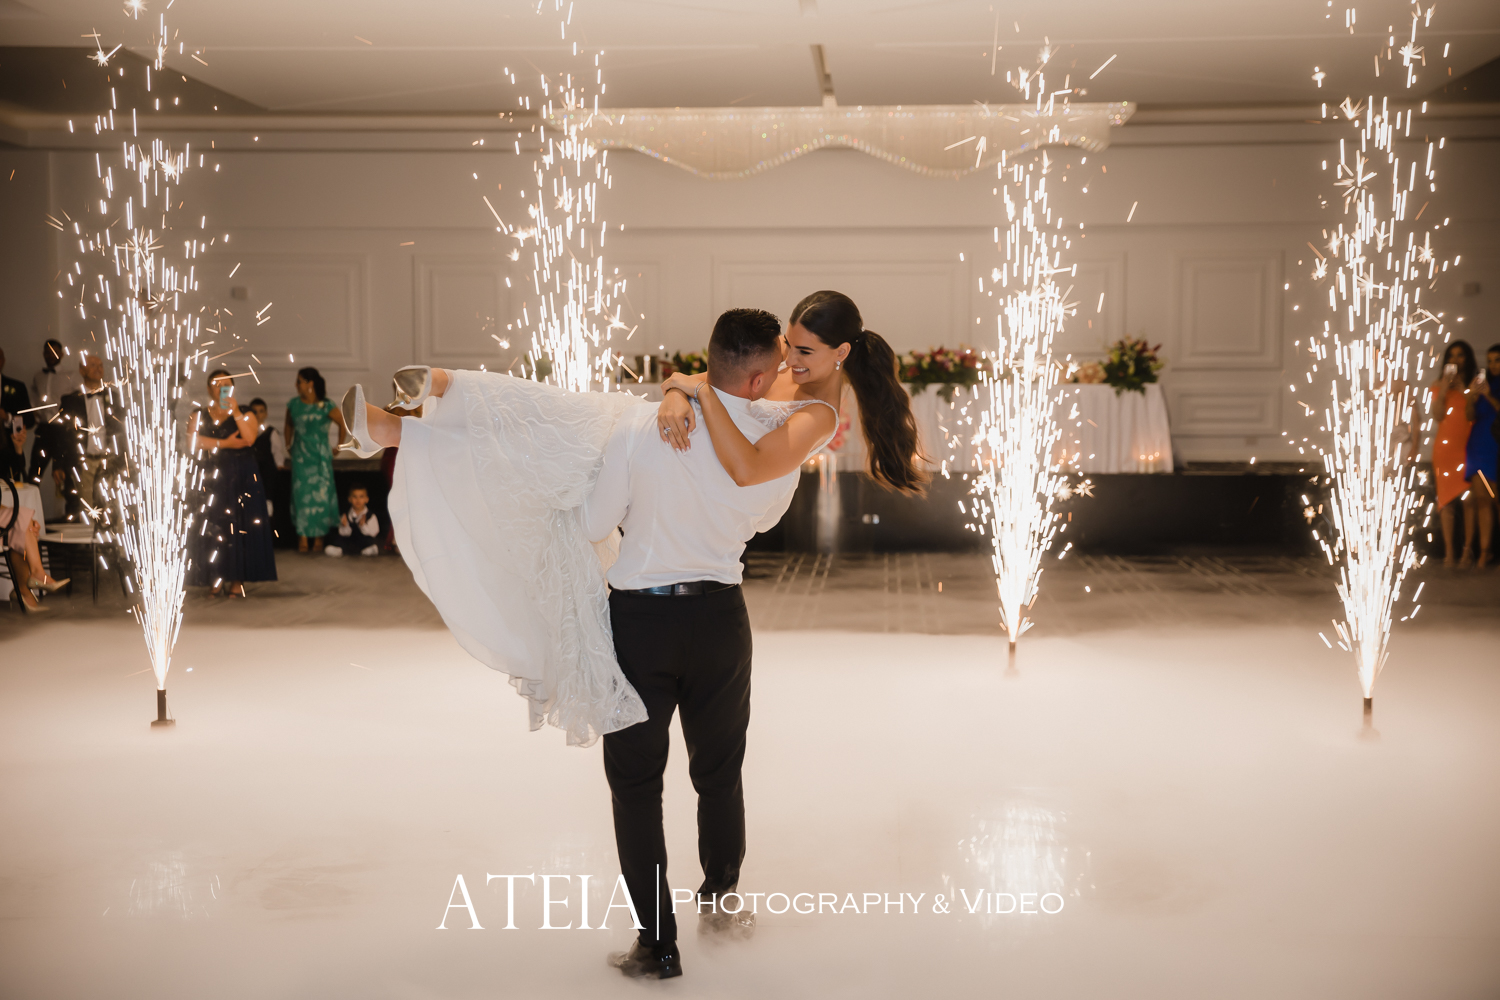 , Tia and Luke&#8217;s wedding photography at Alencia captured by ATEIA Photography &#038; Video